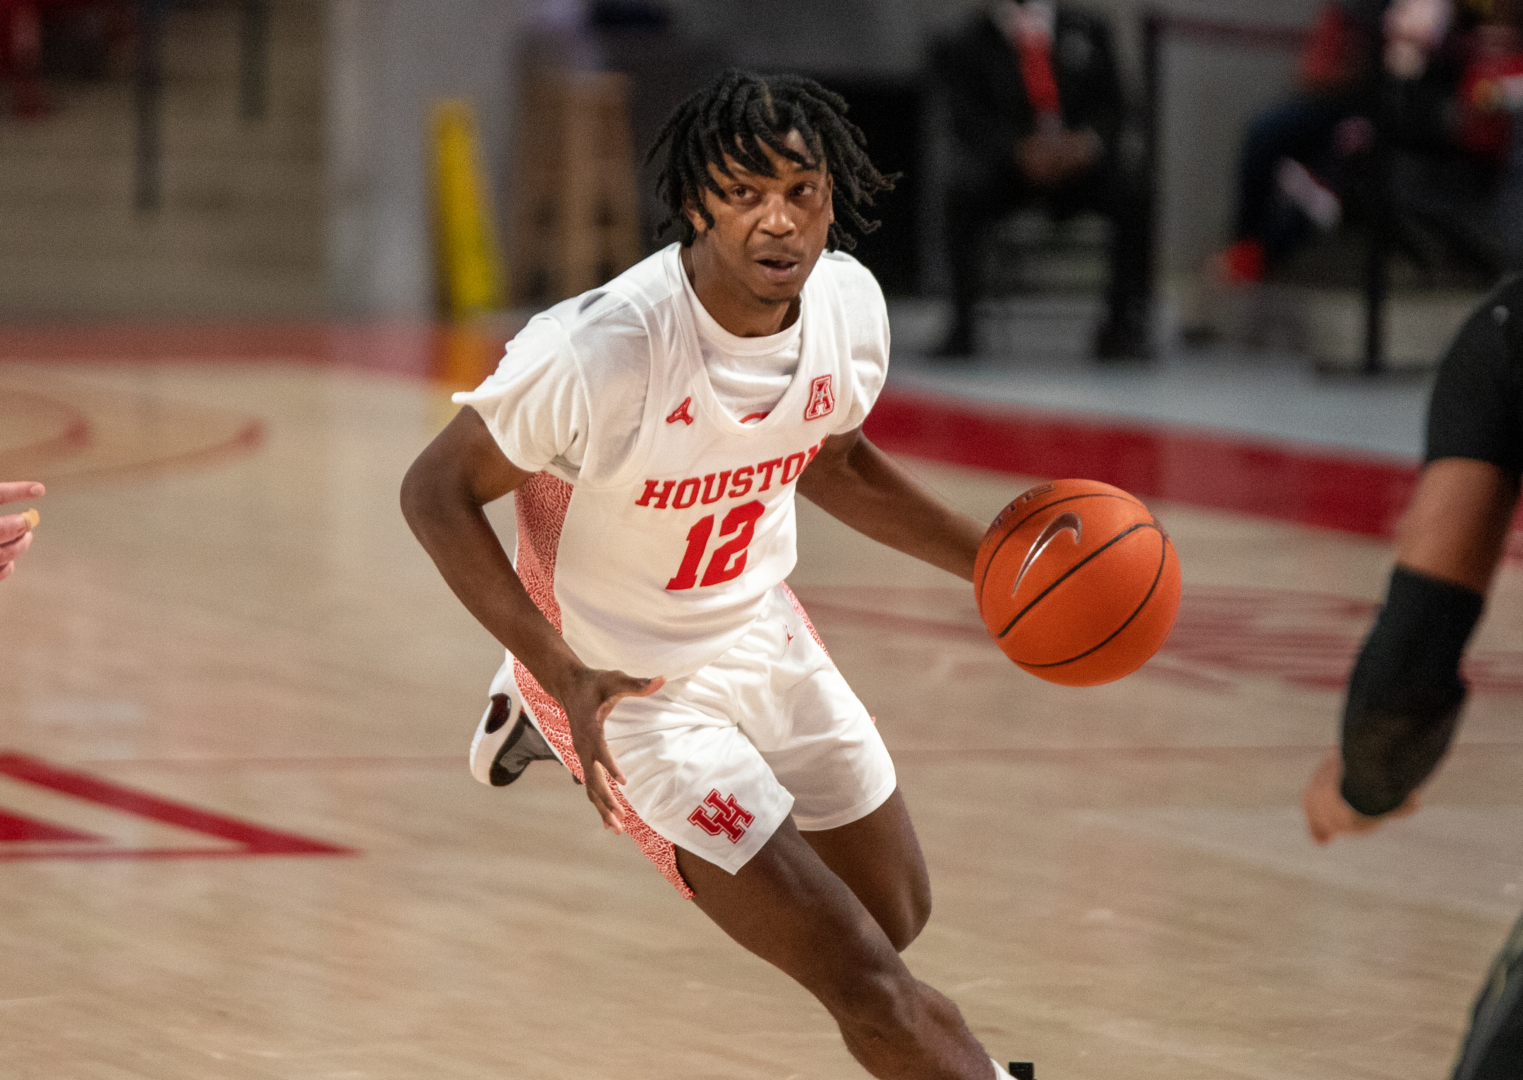 UH freshman guard Tramon Mark looks to attack in Houston's win over UCF Sunday afternoon | Andy Yanez/The Cougar